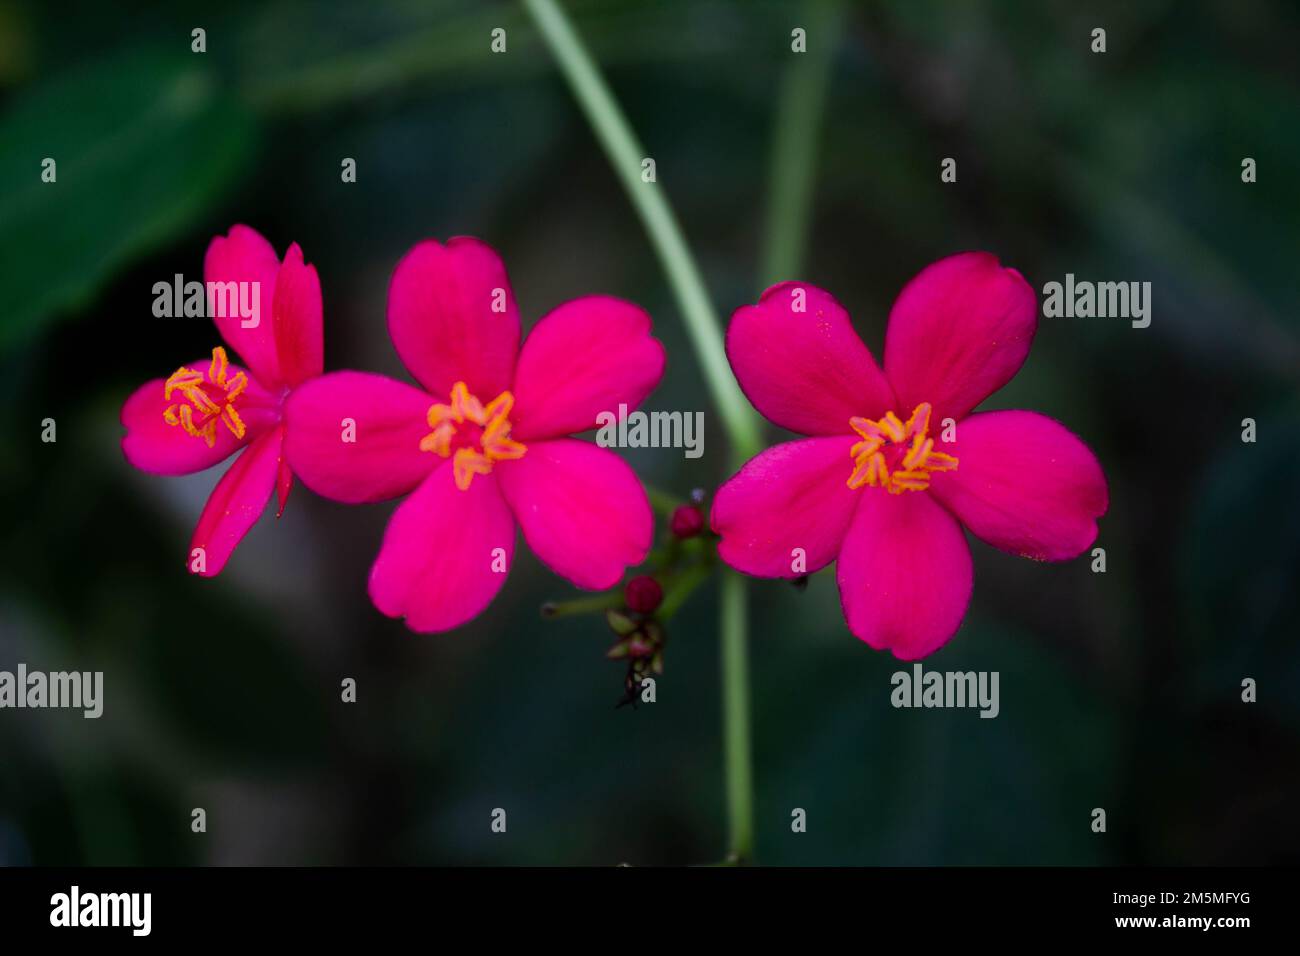 Red Peregrina flowers known as Spicy Jatropha bloom perfectly with blurred background Stock Photo